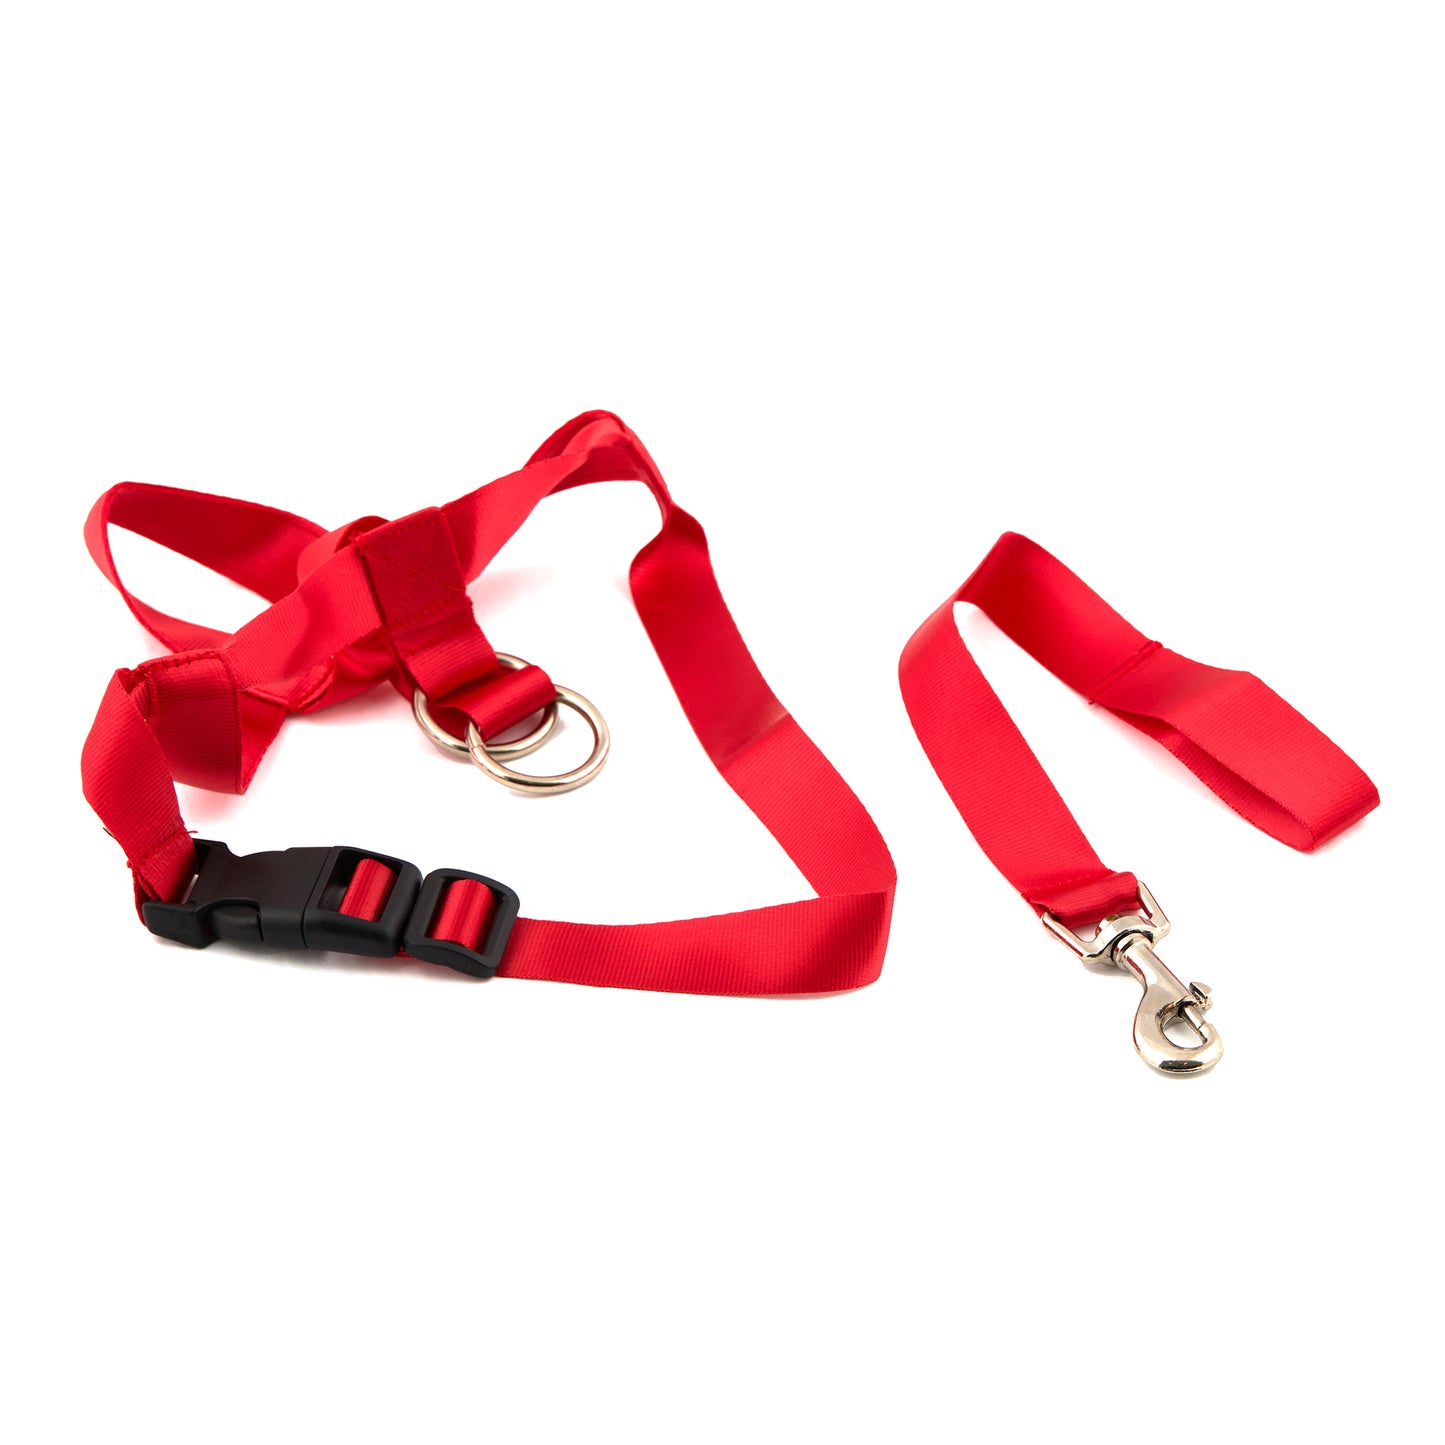 Best Dog Headcollar for Gentle and Effective Dog Training